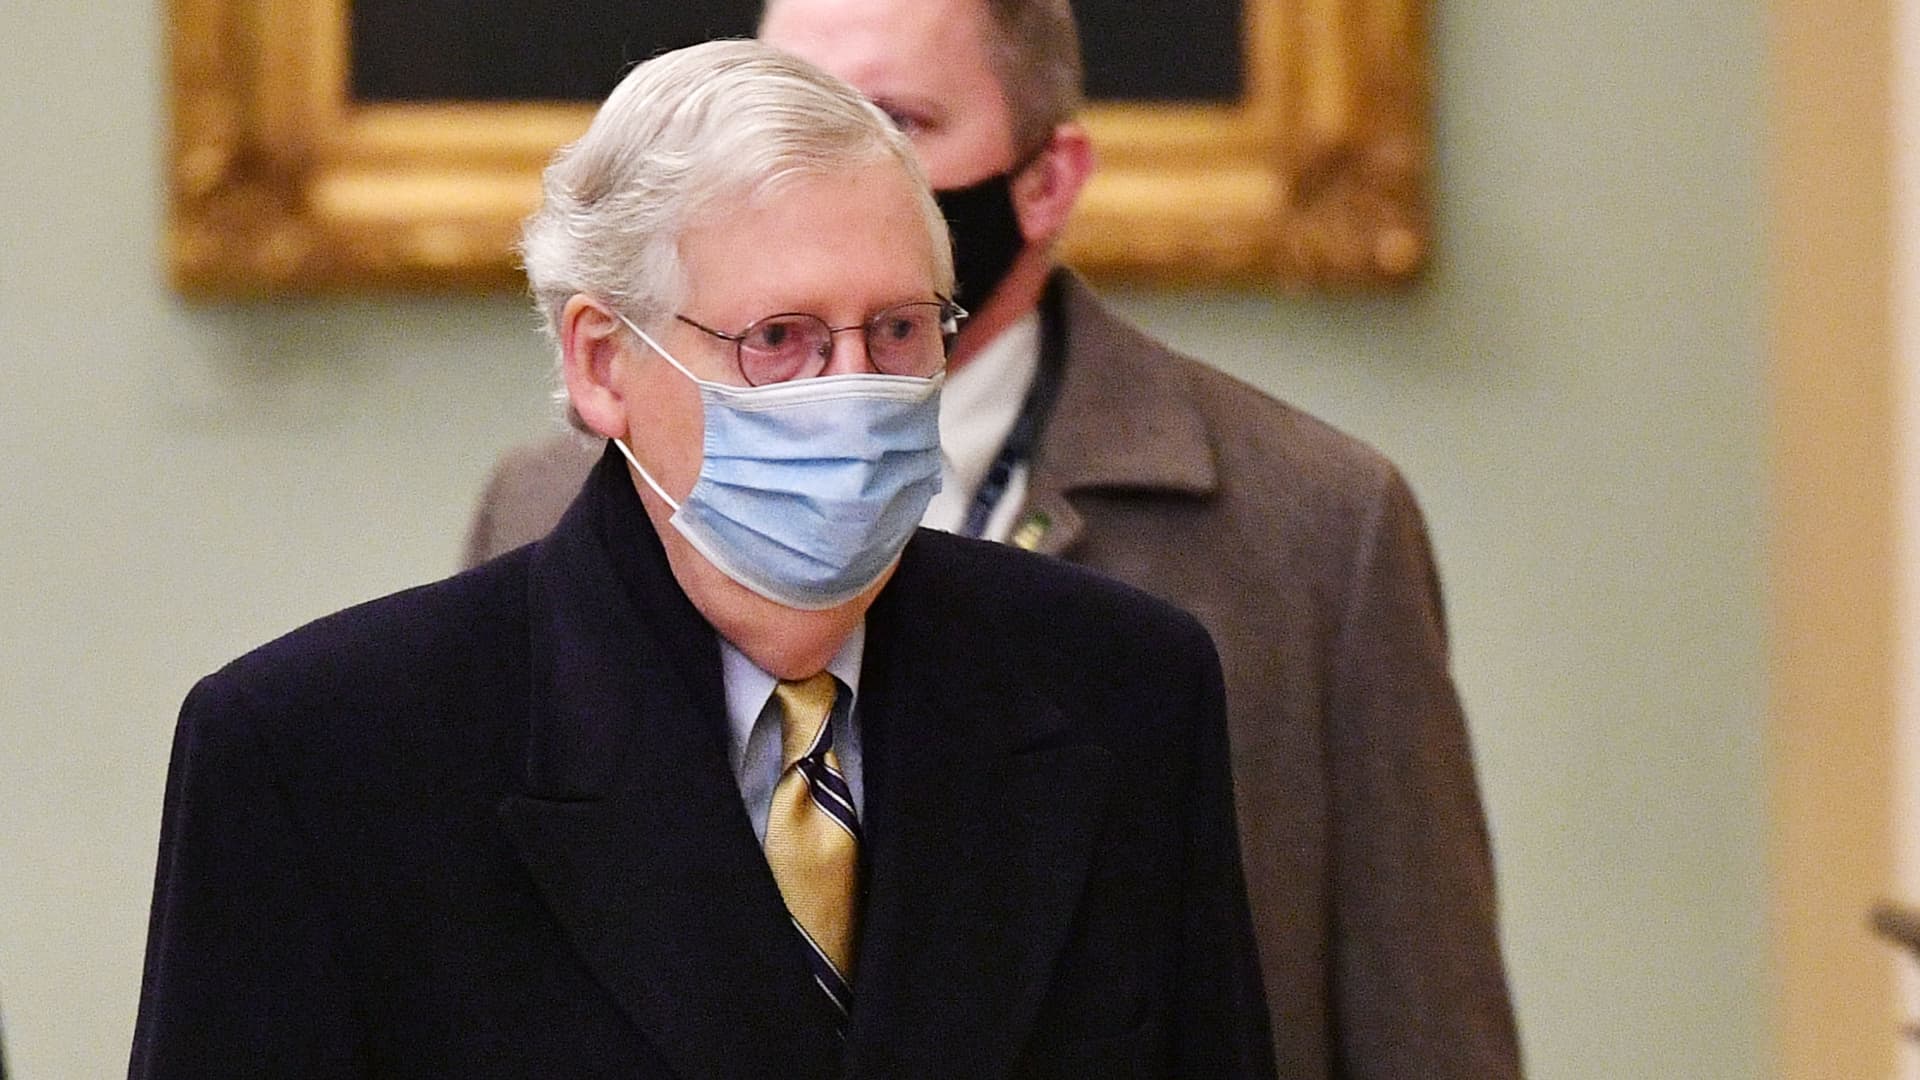 Republican Senate Minority Leader Mitch McConnell arrives at the US Capitol for the fifth day of the second impeachment trial of former US President Donald Trump, on February 13, 2021, in Washington, DC.